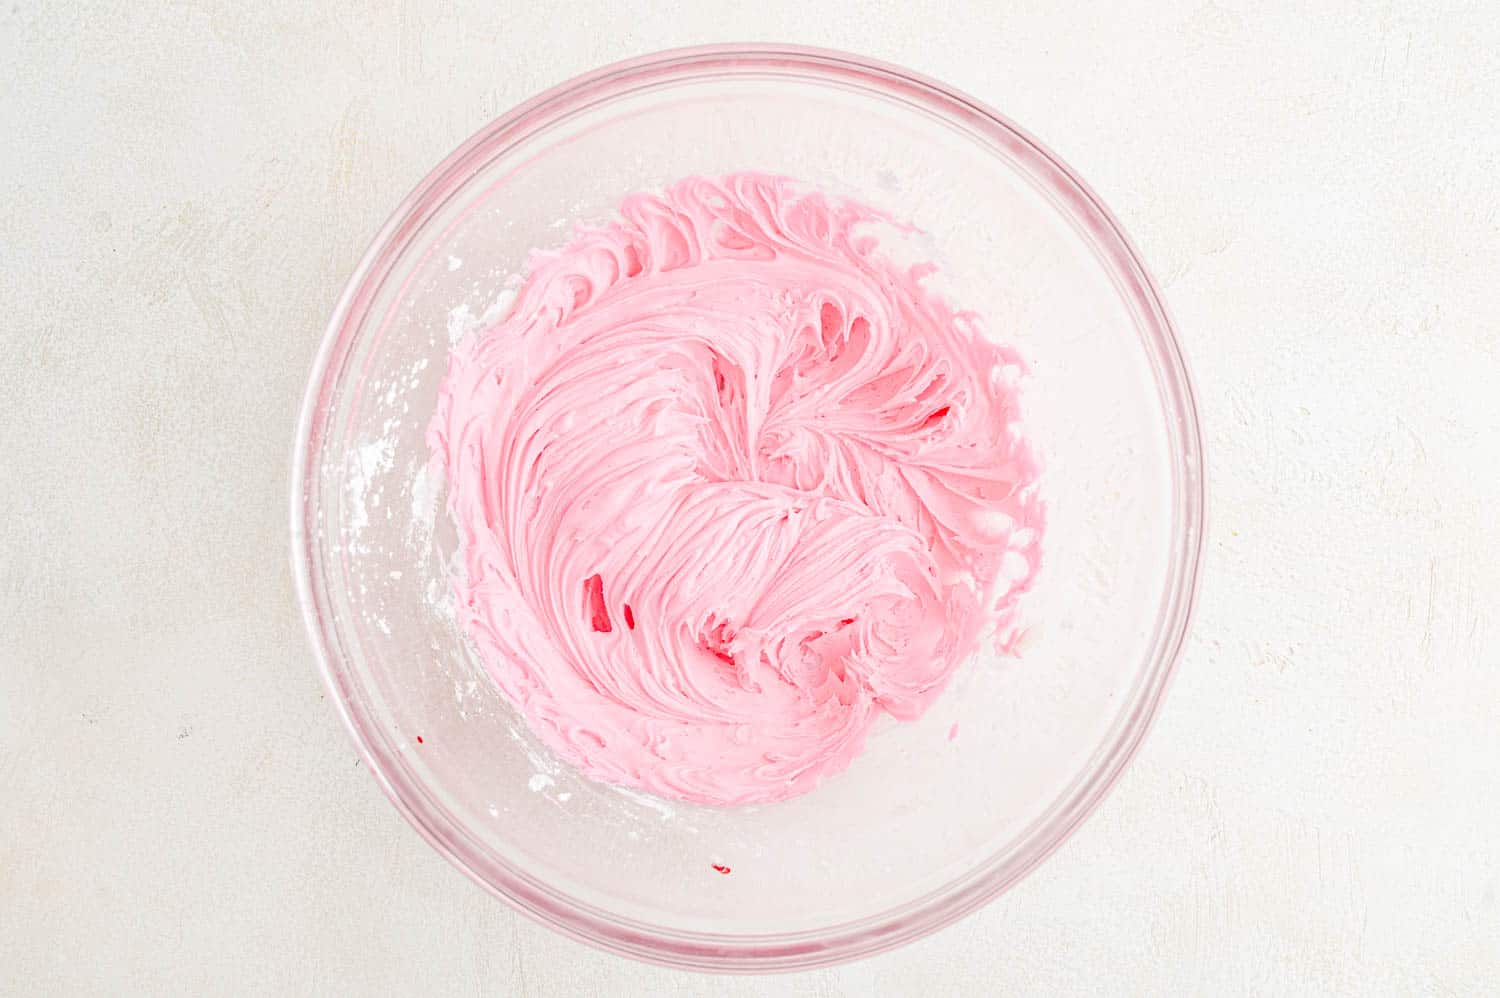 Pink buttercream frosting in a mixing bowl.